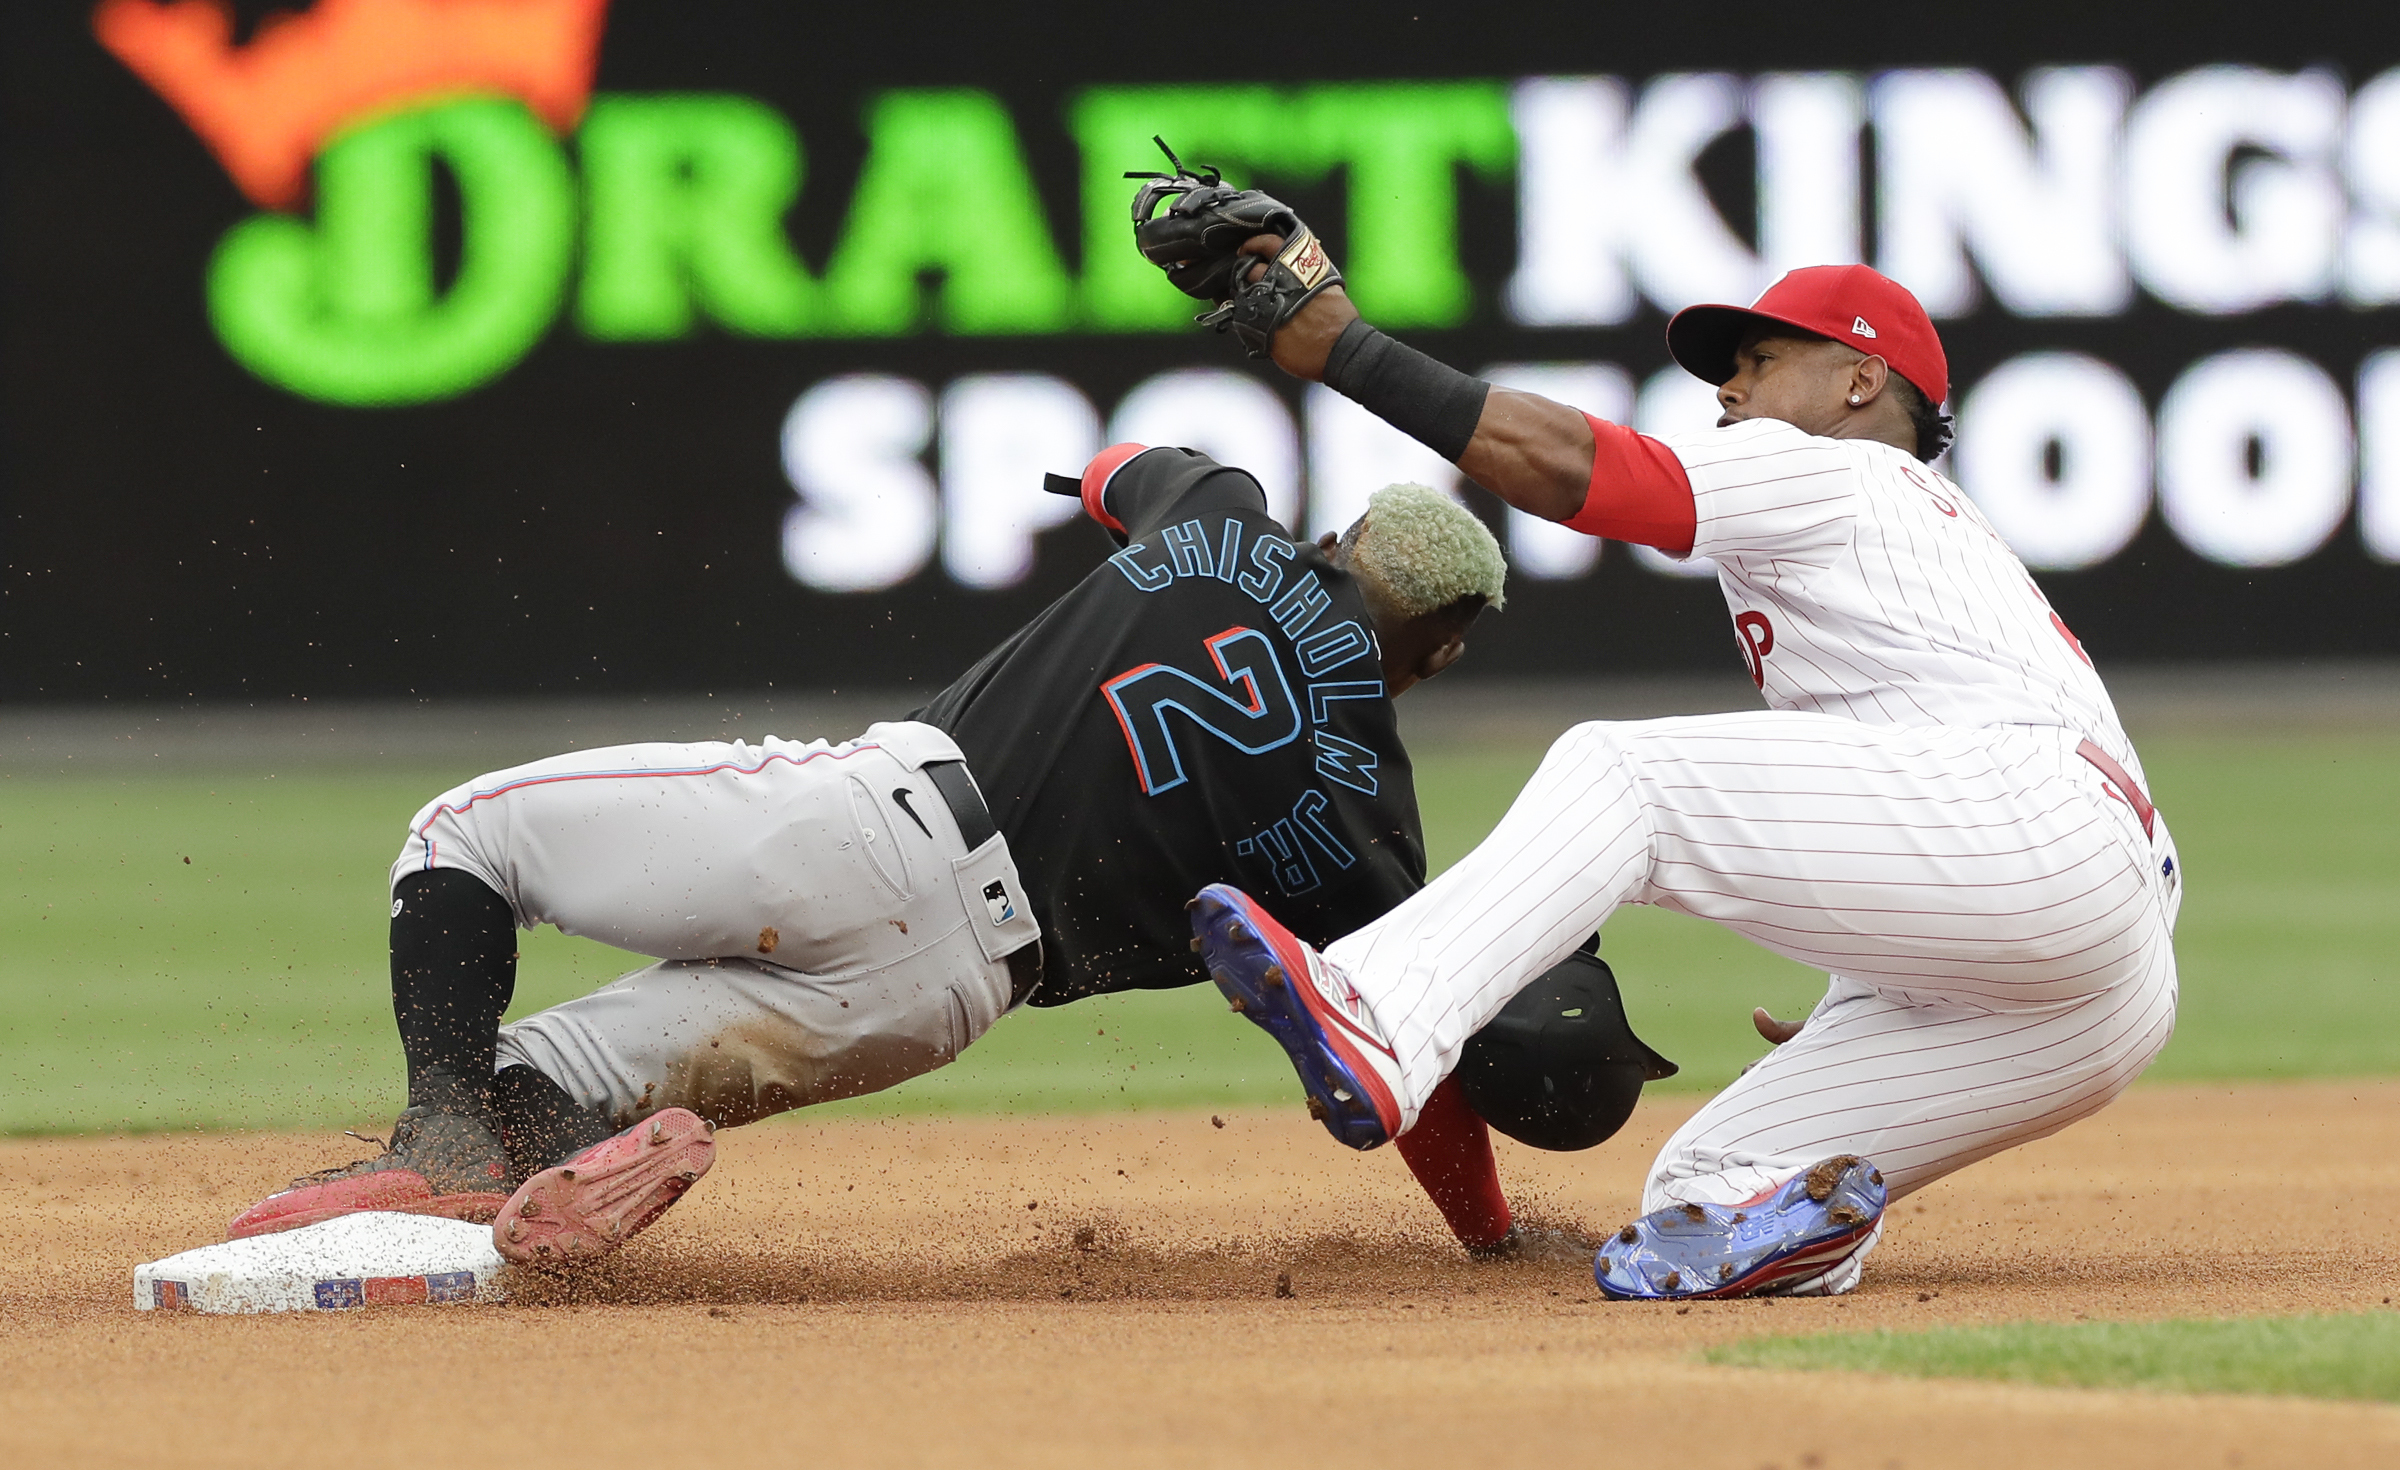 Realmuto powers Phils over Marlins to finish suspended game – The